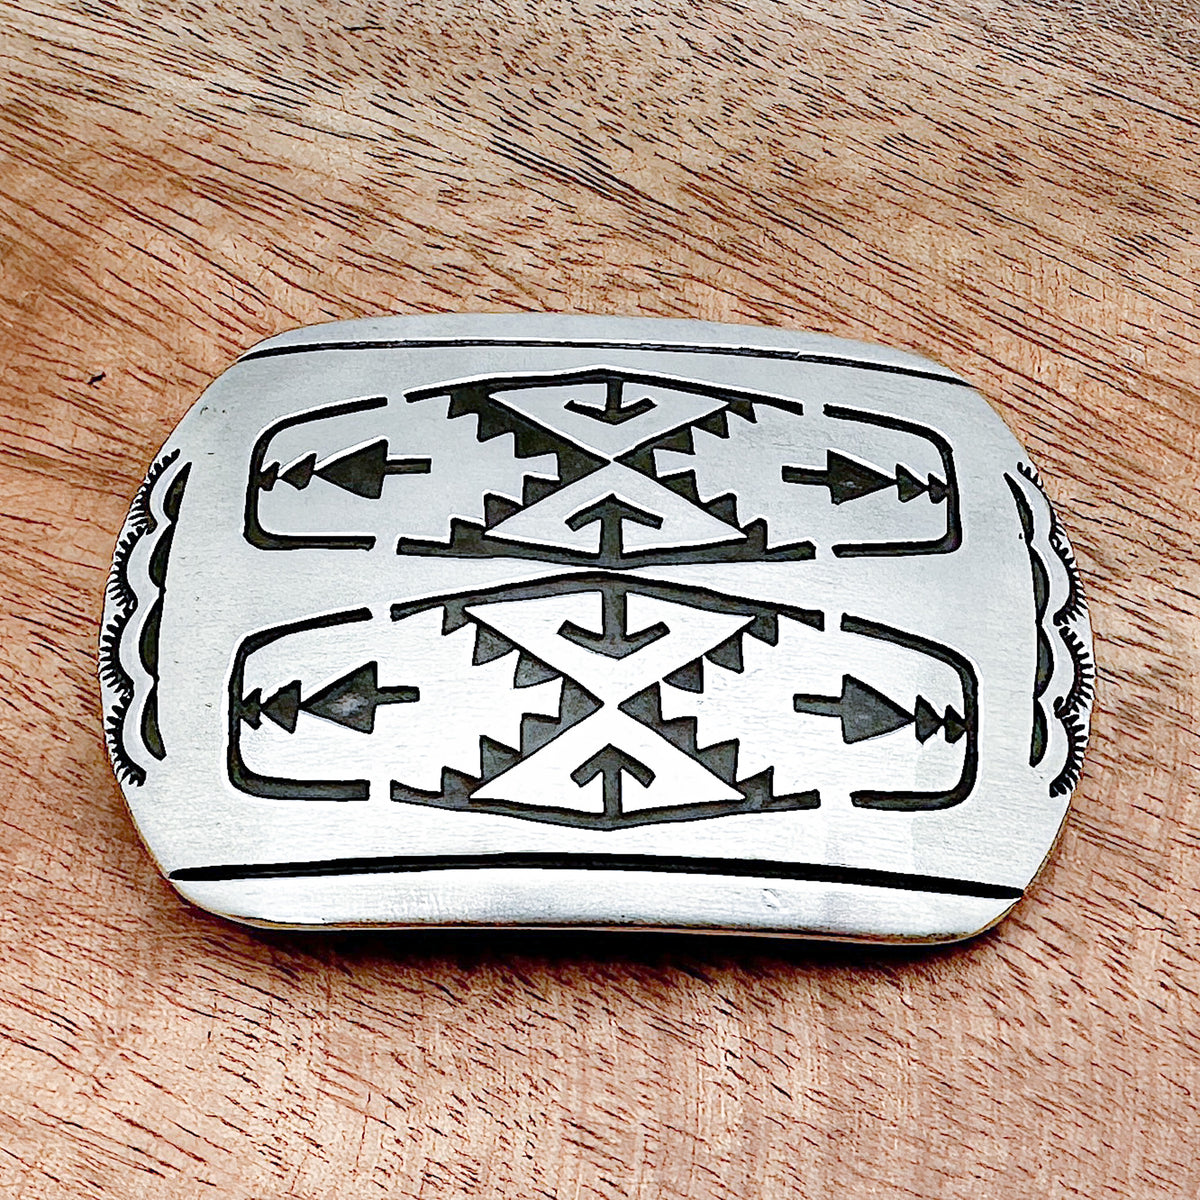 A sterling silver belt buckle with etchings of rain clouds and arrows on the front